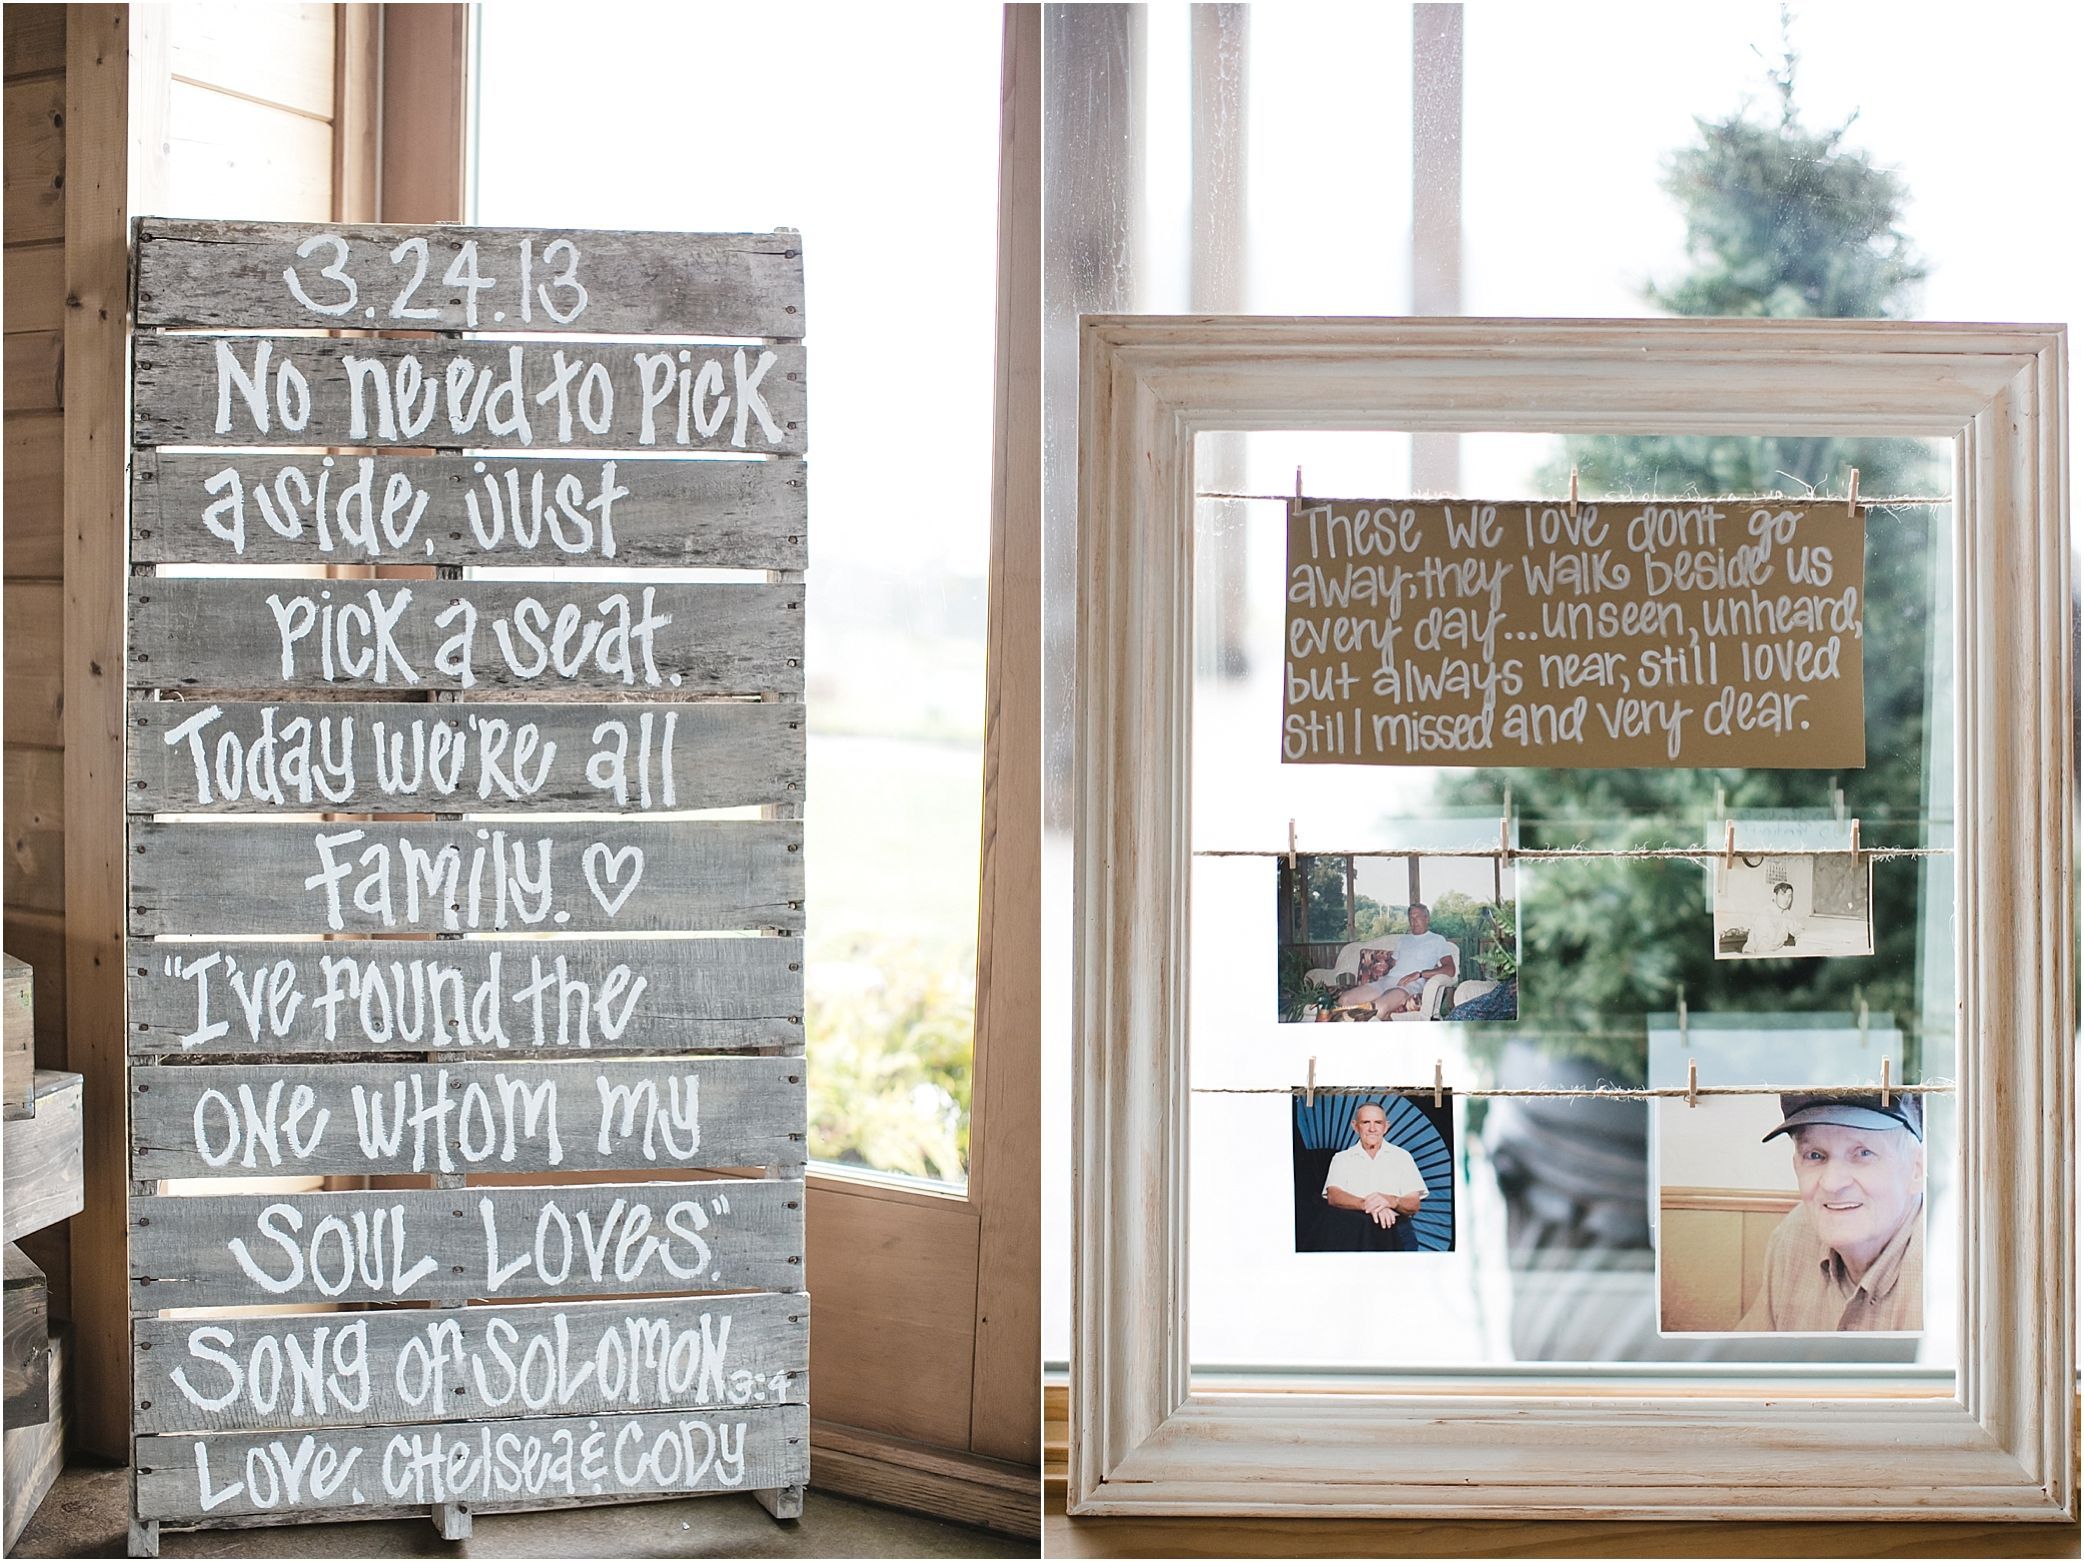 Rustic wedding idea: Write a message or a bible verse on an old pallet and stand